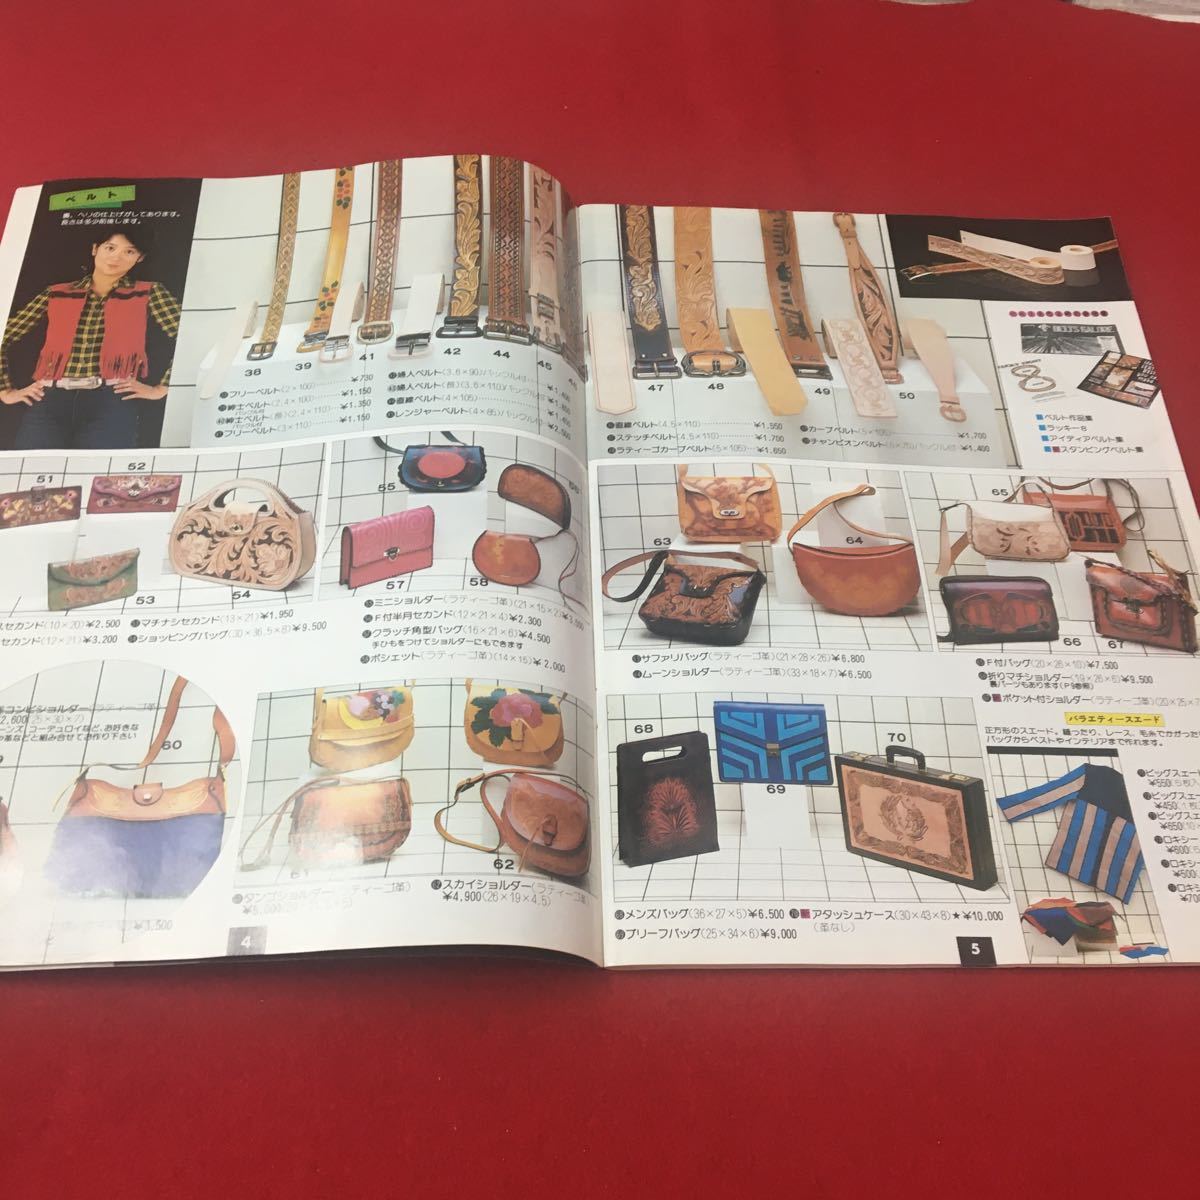 M6c-006 craft *79~*80 Leather Craft Catalog No.34 hand made leather leather small articles purse bag catalog expiration of a term craft company 